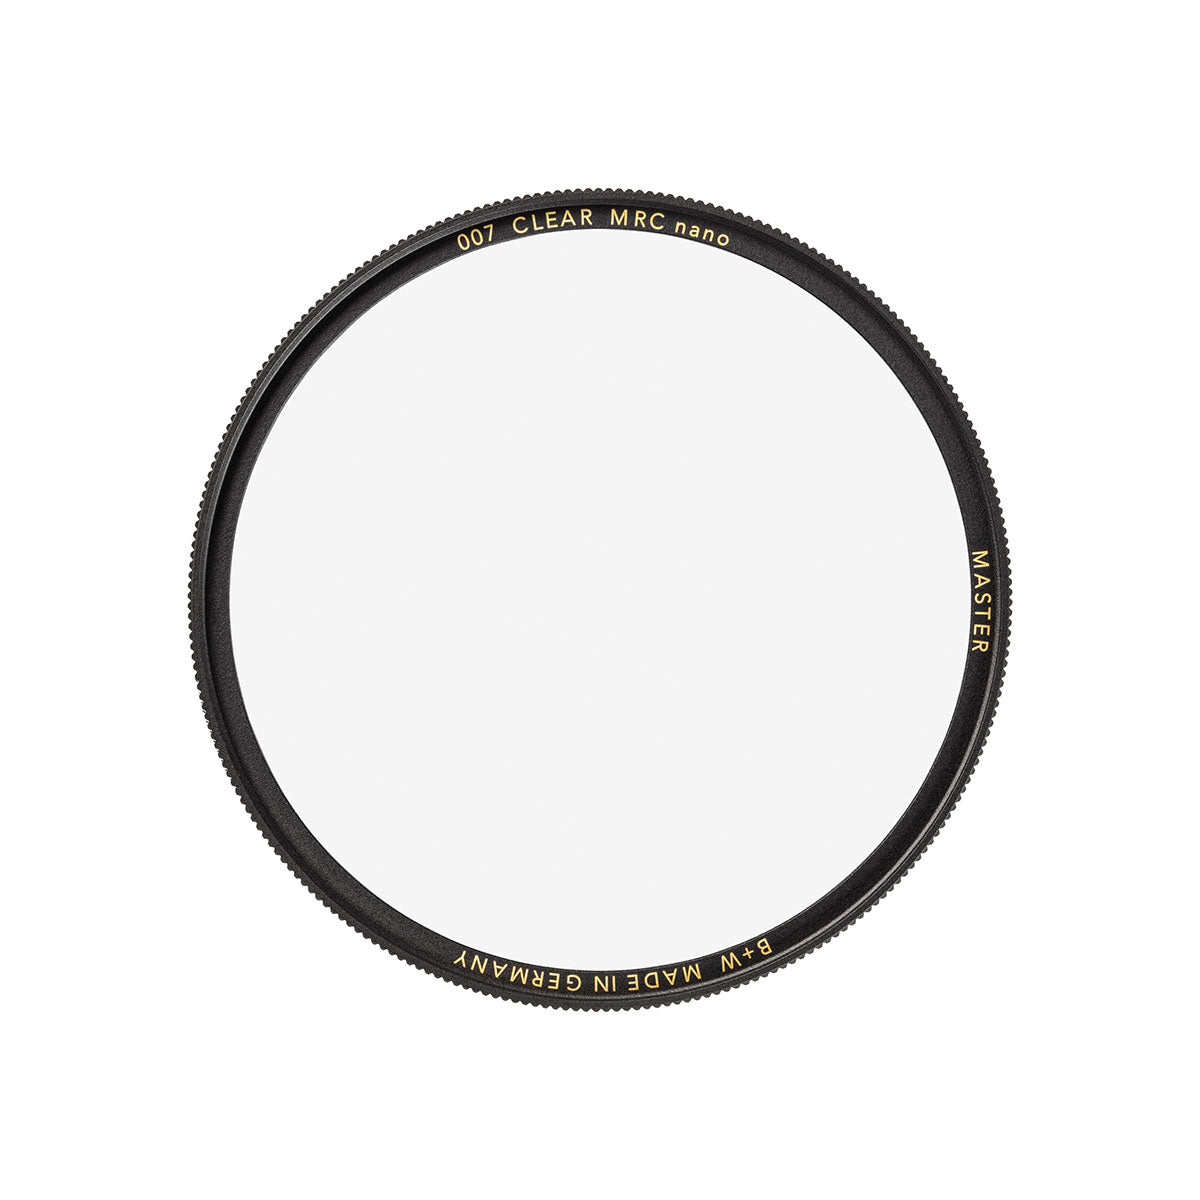 B+W Master 007 Clear Filter MRC Nano (Clear Filter 保護濾鏡) 濾鏡 Microworks Online Store